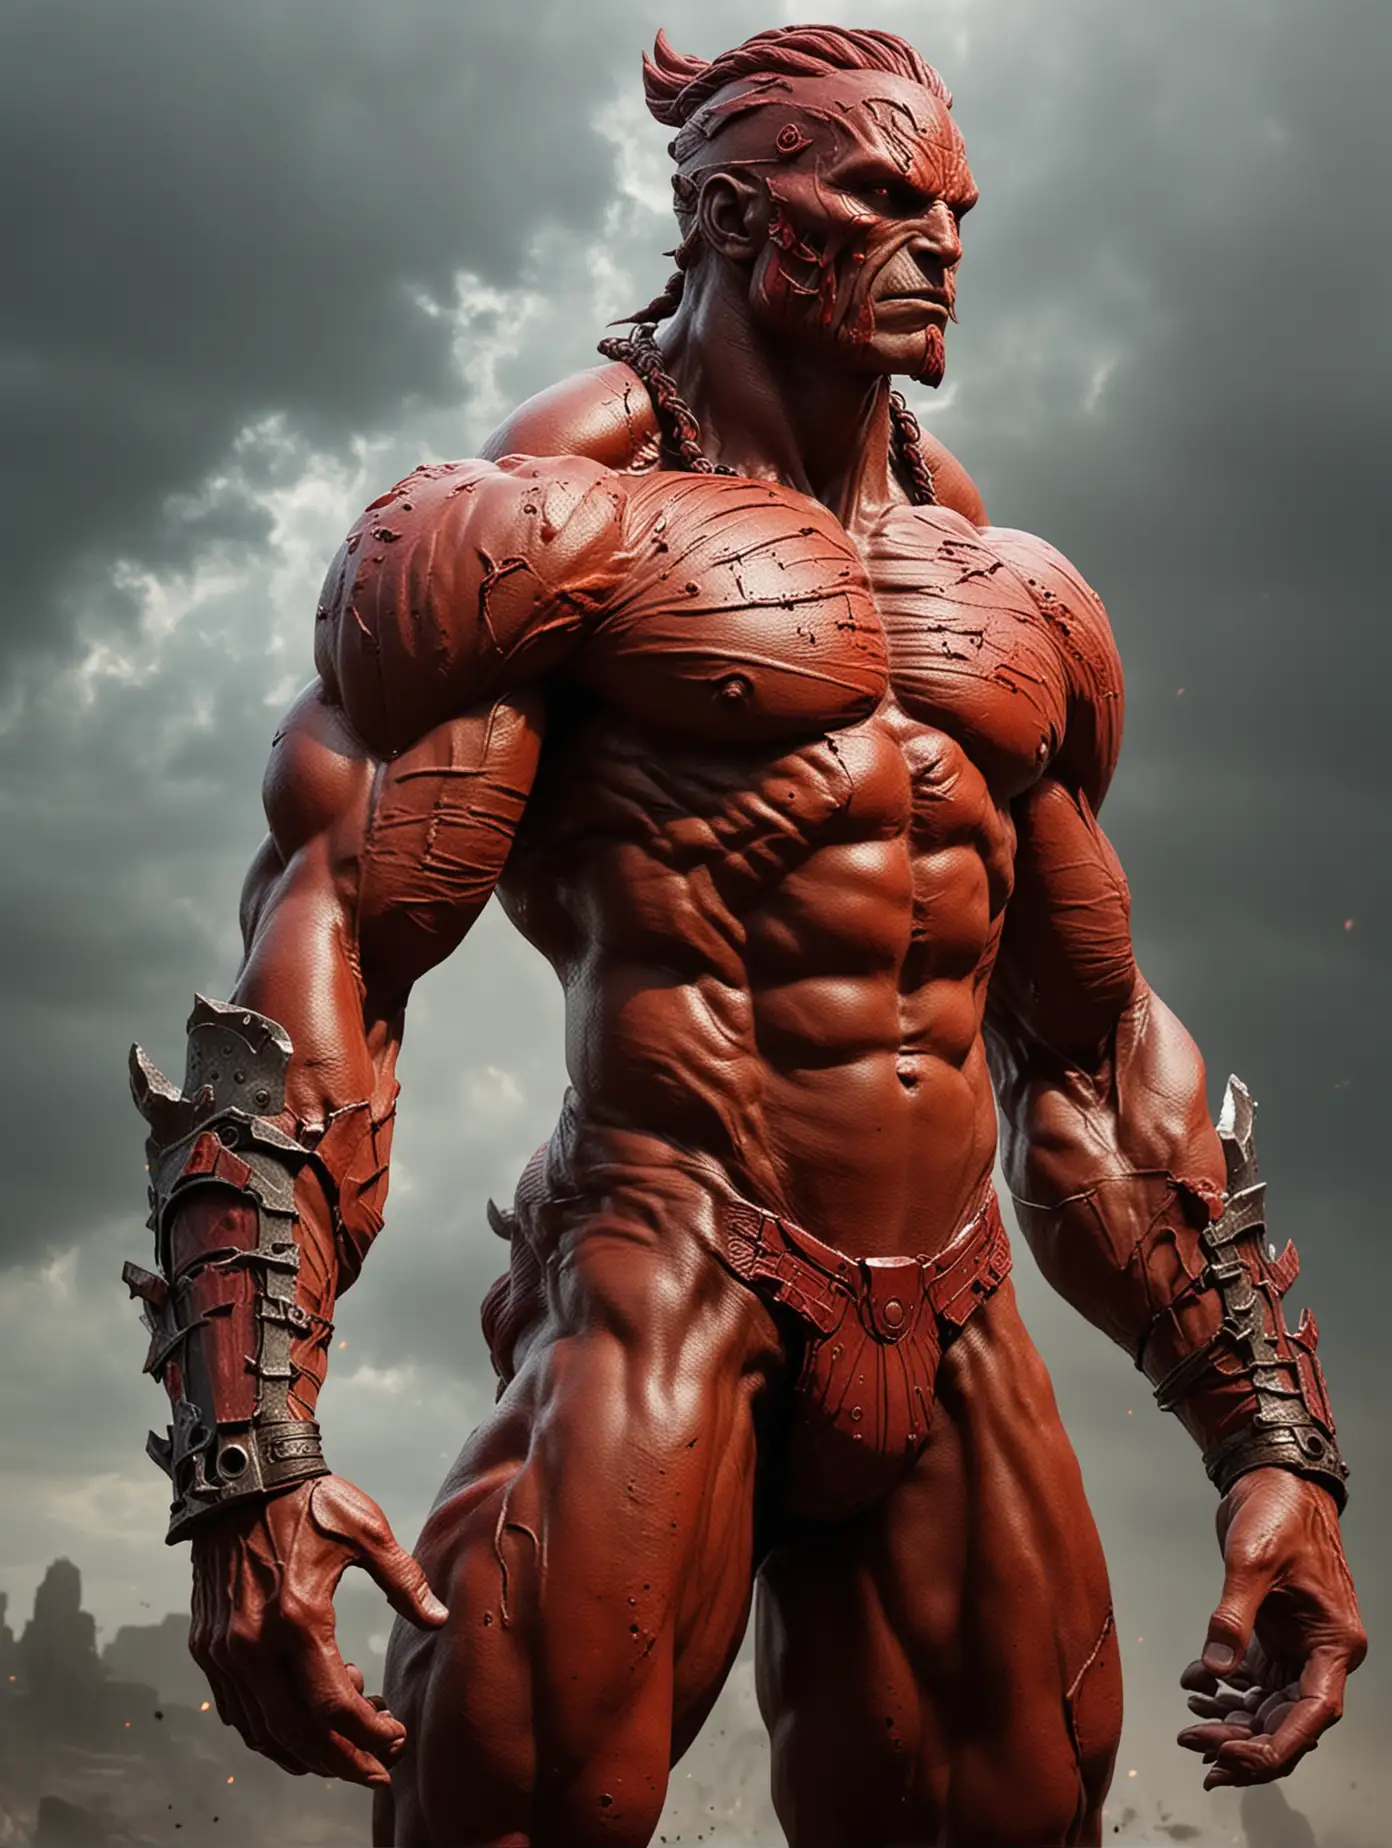 Powerful War God with Red Skin